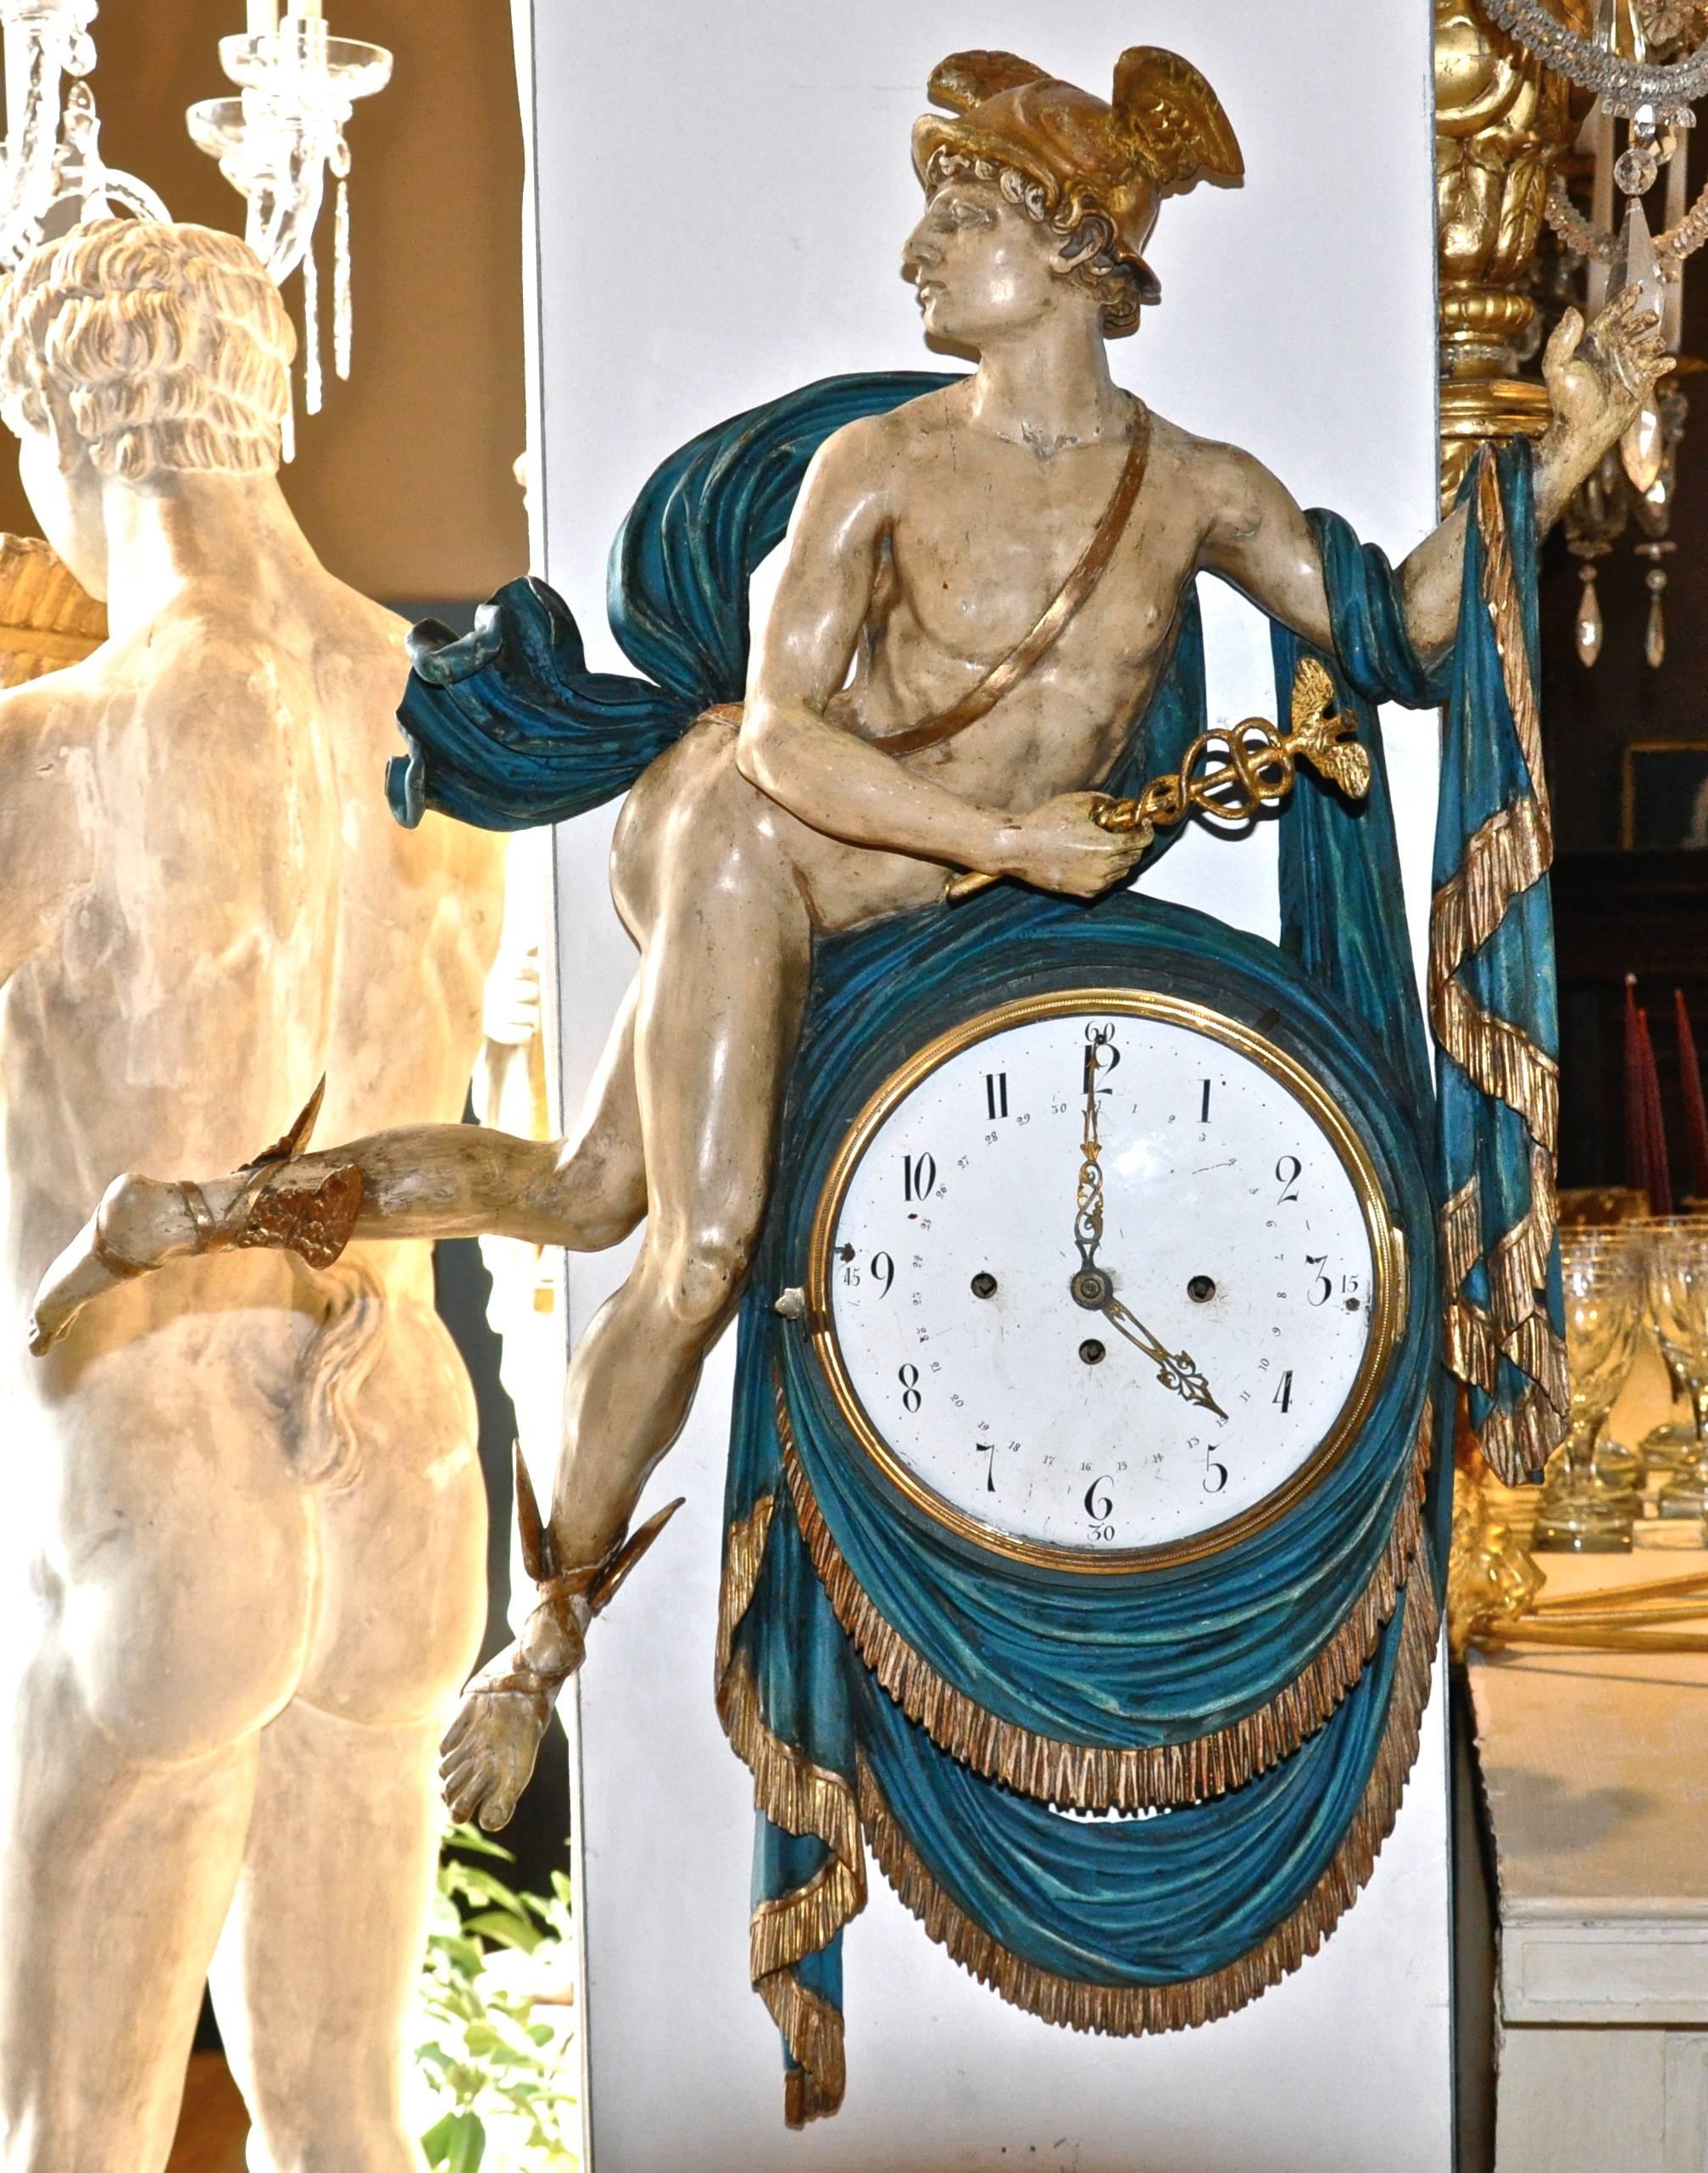 Rare and complete Austrian early 19th century wall clock in form of the god mercury.

Carved, parcel gilt.
Original works to clock.
Exquisitely rendered.
Paint original as well as is gilding.

Mercury is the patron god of financial gain,